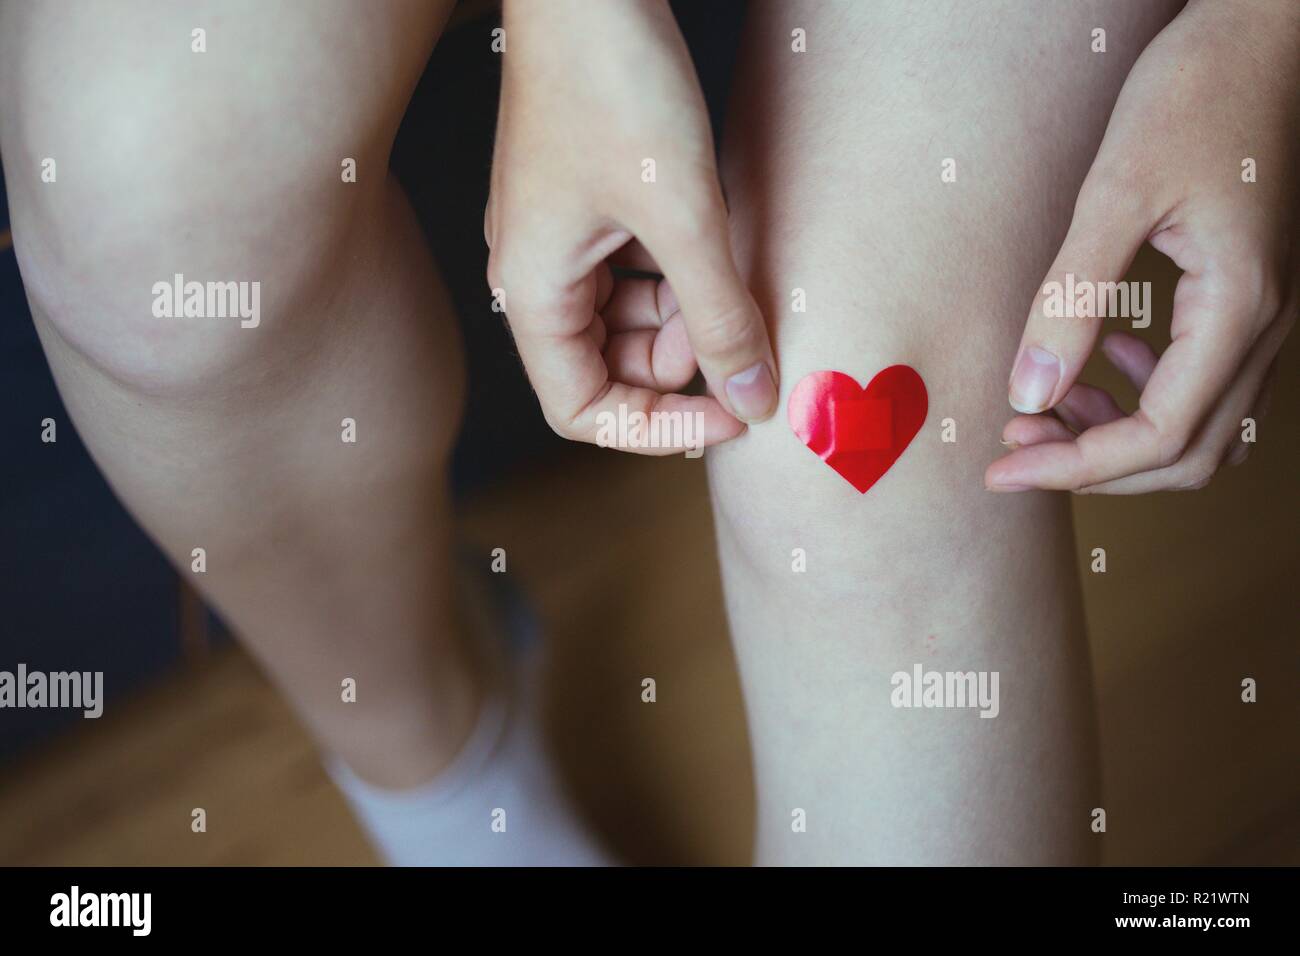 girl glues medical plaster in the form of a red heart on the leg Stock Photo